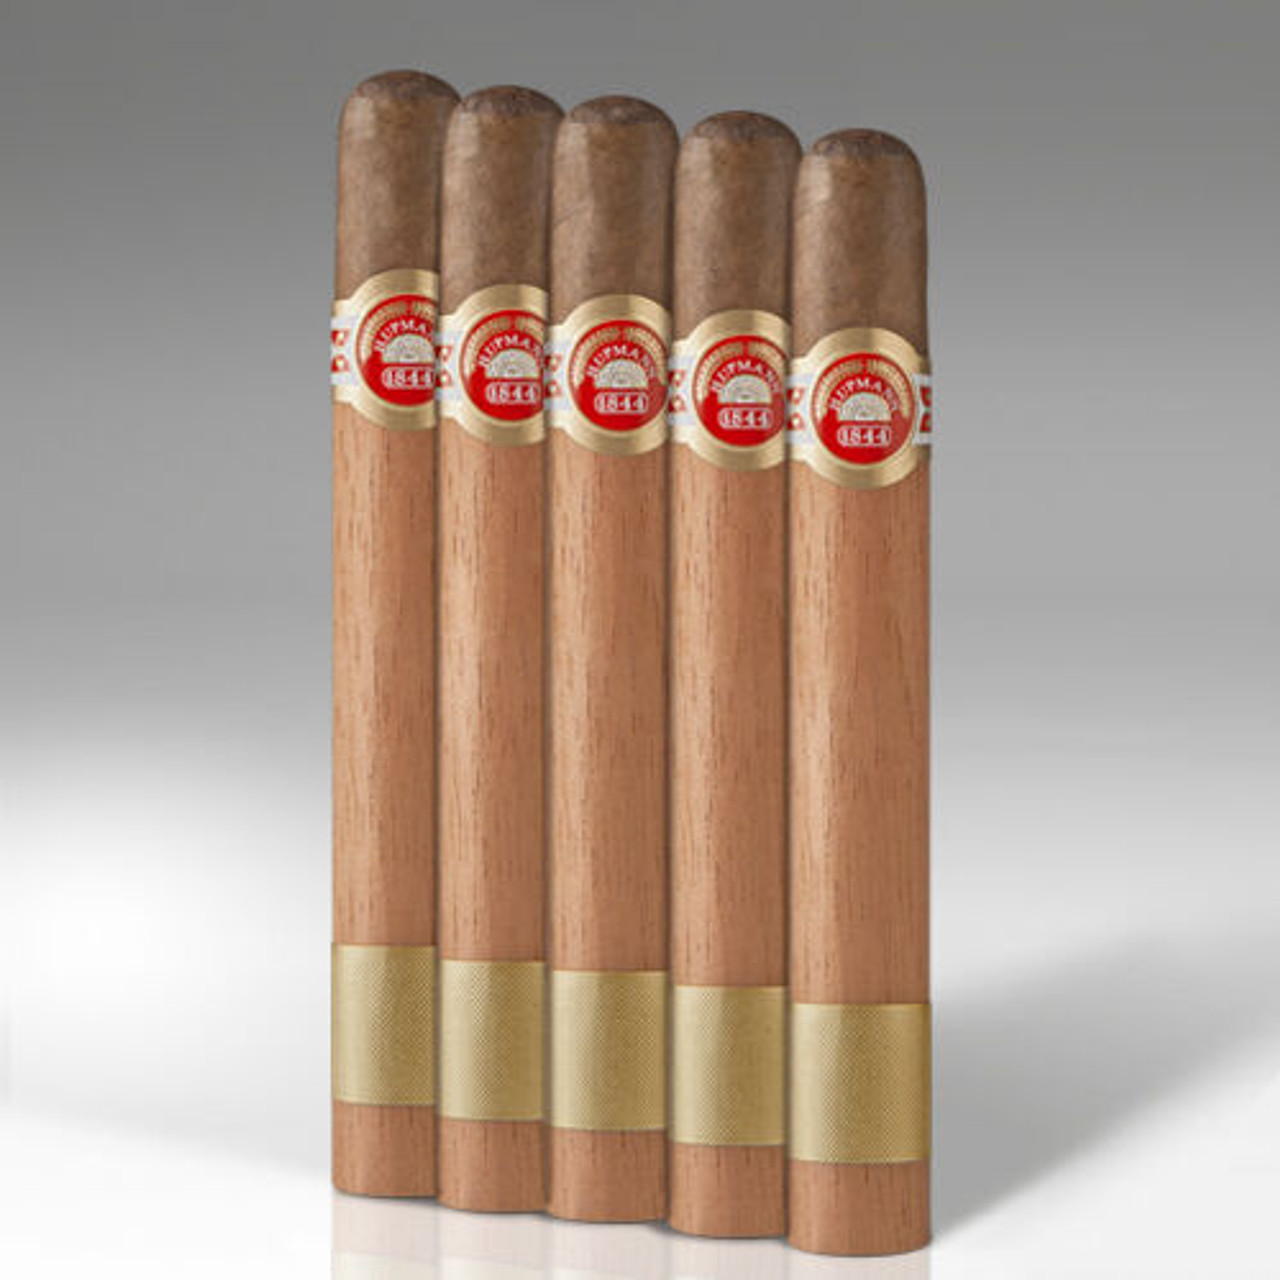 H. Upmann Special Seleccion Rothschilde Maduro Cigars - 5 x 50 (Pack of 5)